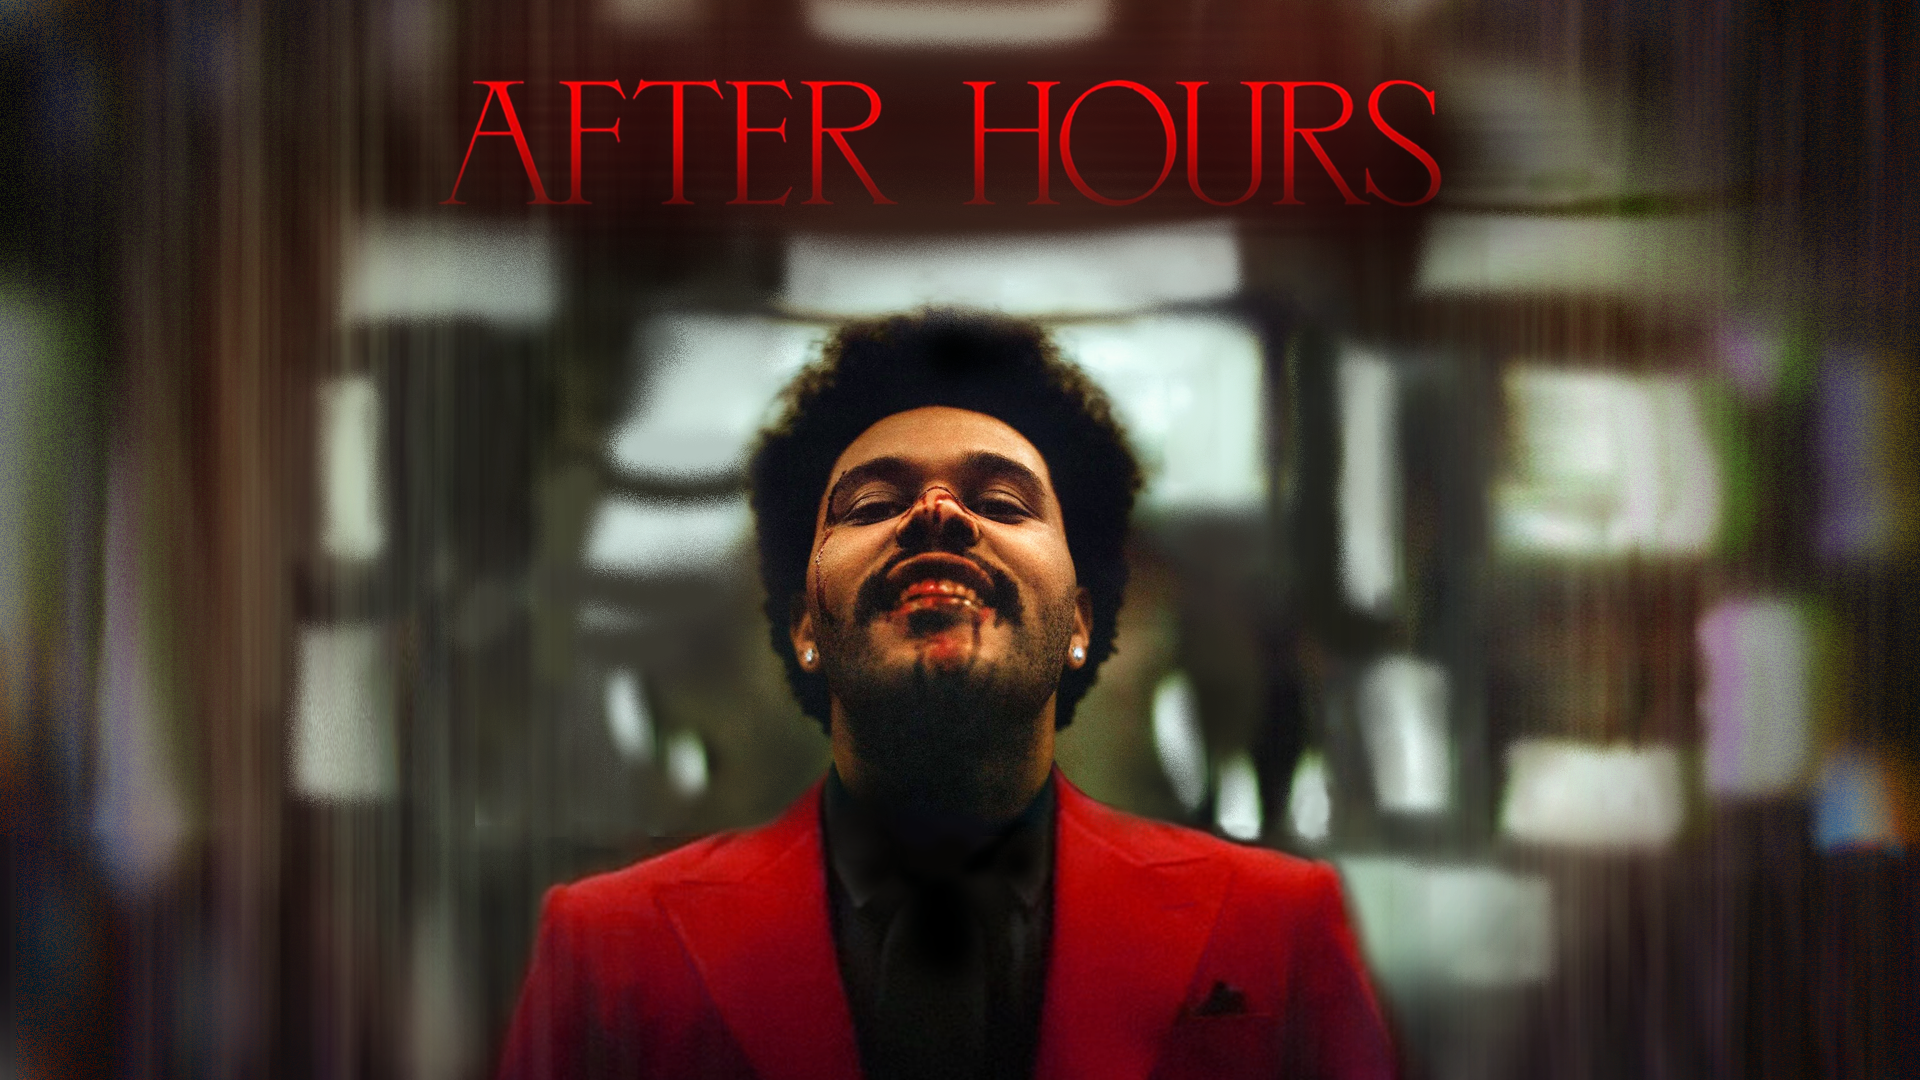 AFTER HOURS REVIEW: THE ANTI-HERO OF POP, by Brad Irish